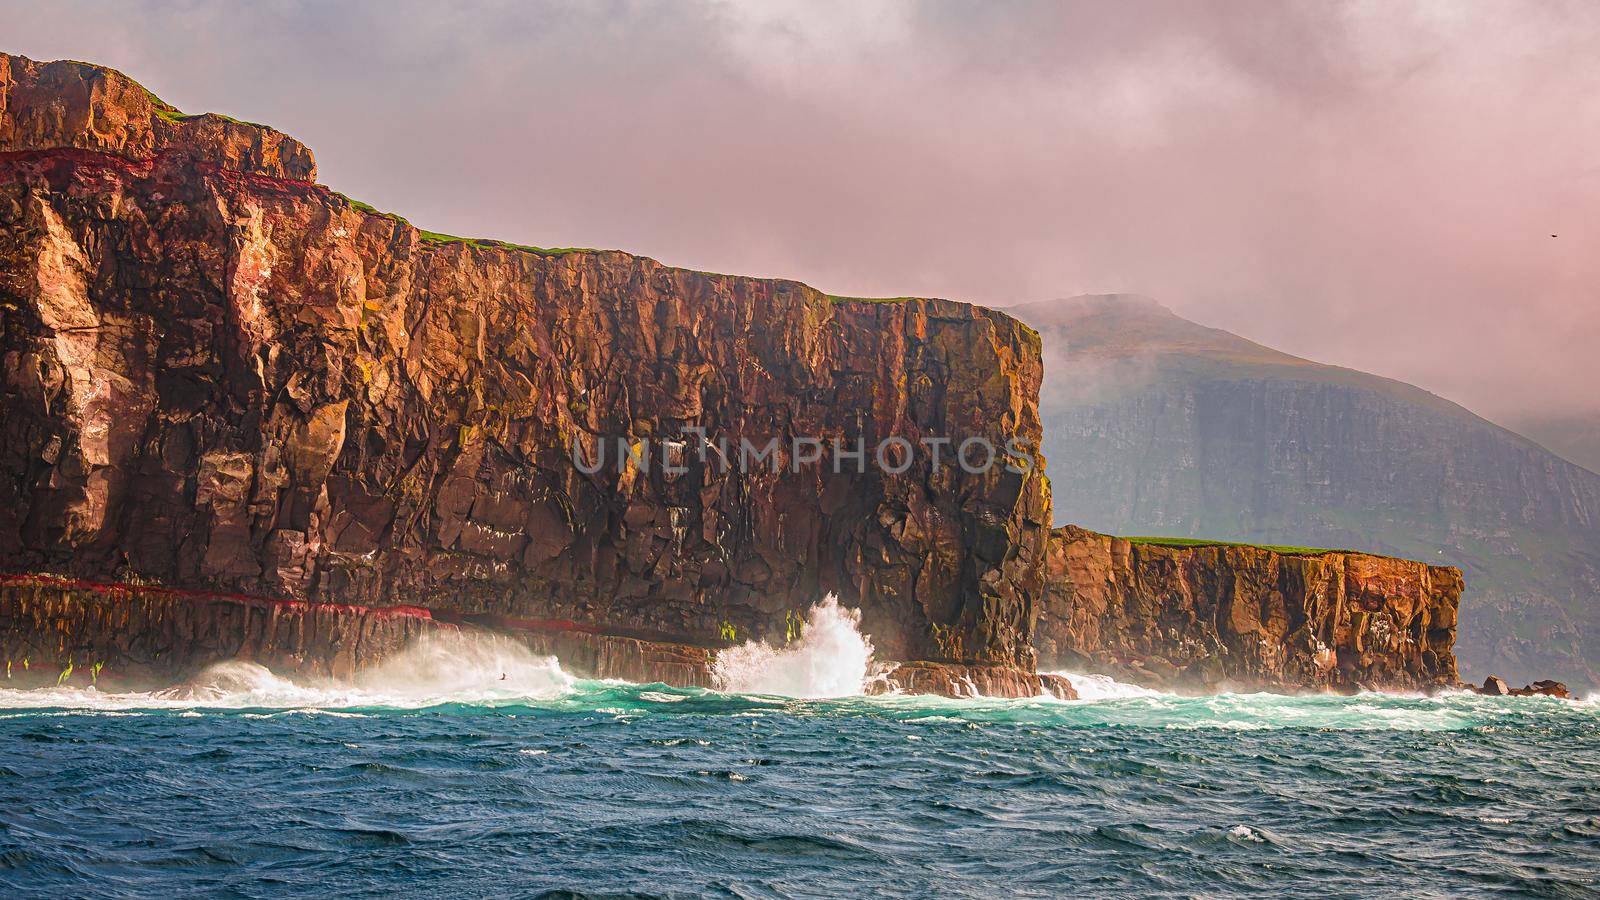 Mythical Faroe Islands in the middle of Atlantic Ocean, summer by neurobite